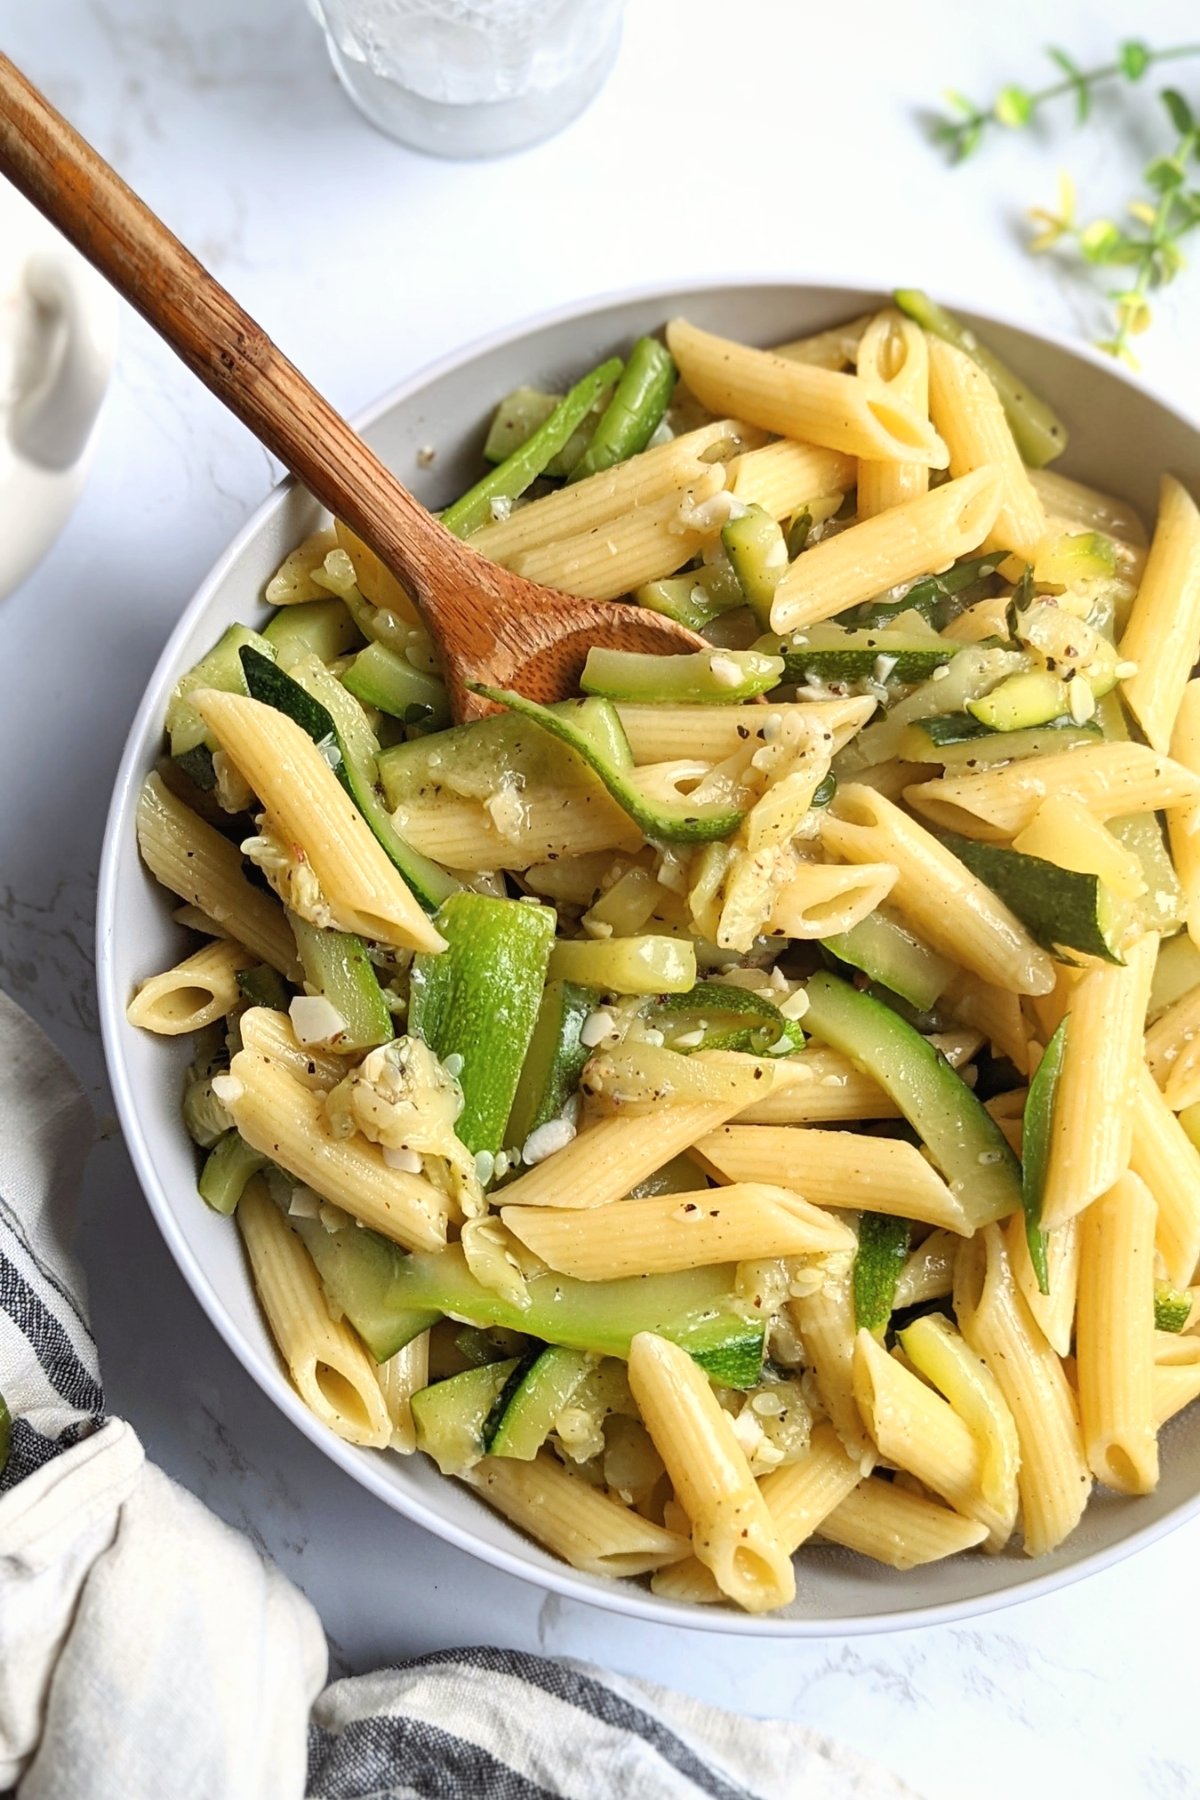 zucchini penne pasta recipe vegetarian and vegan option zucchini pasta with olive oil butter and garlic